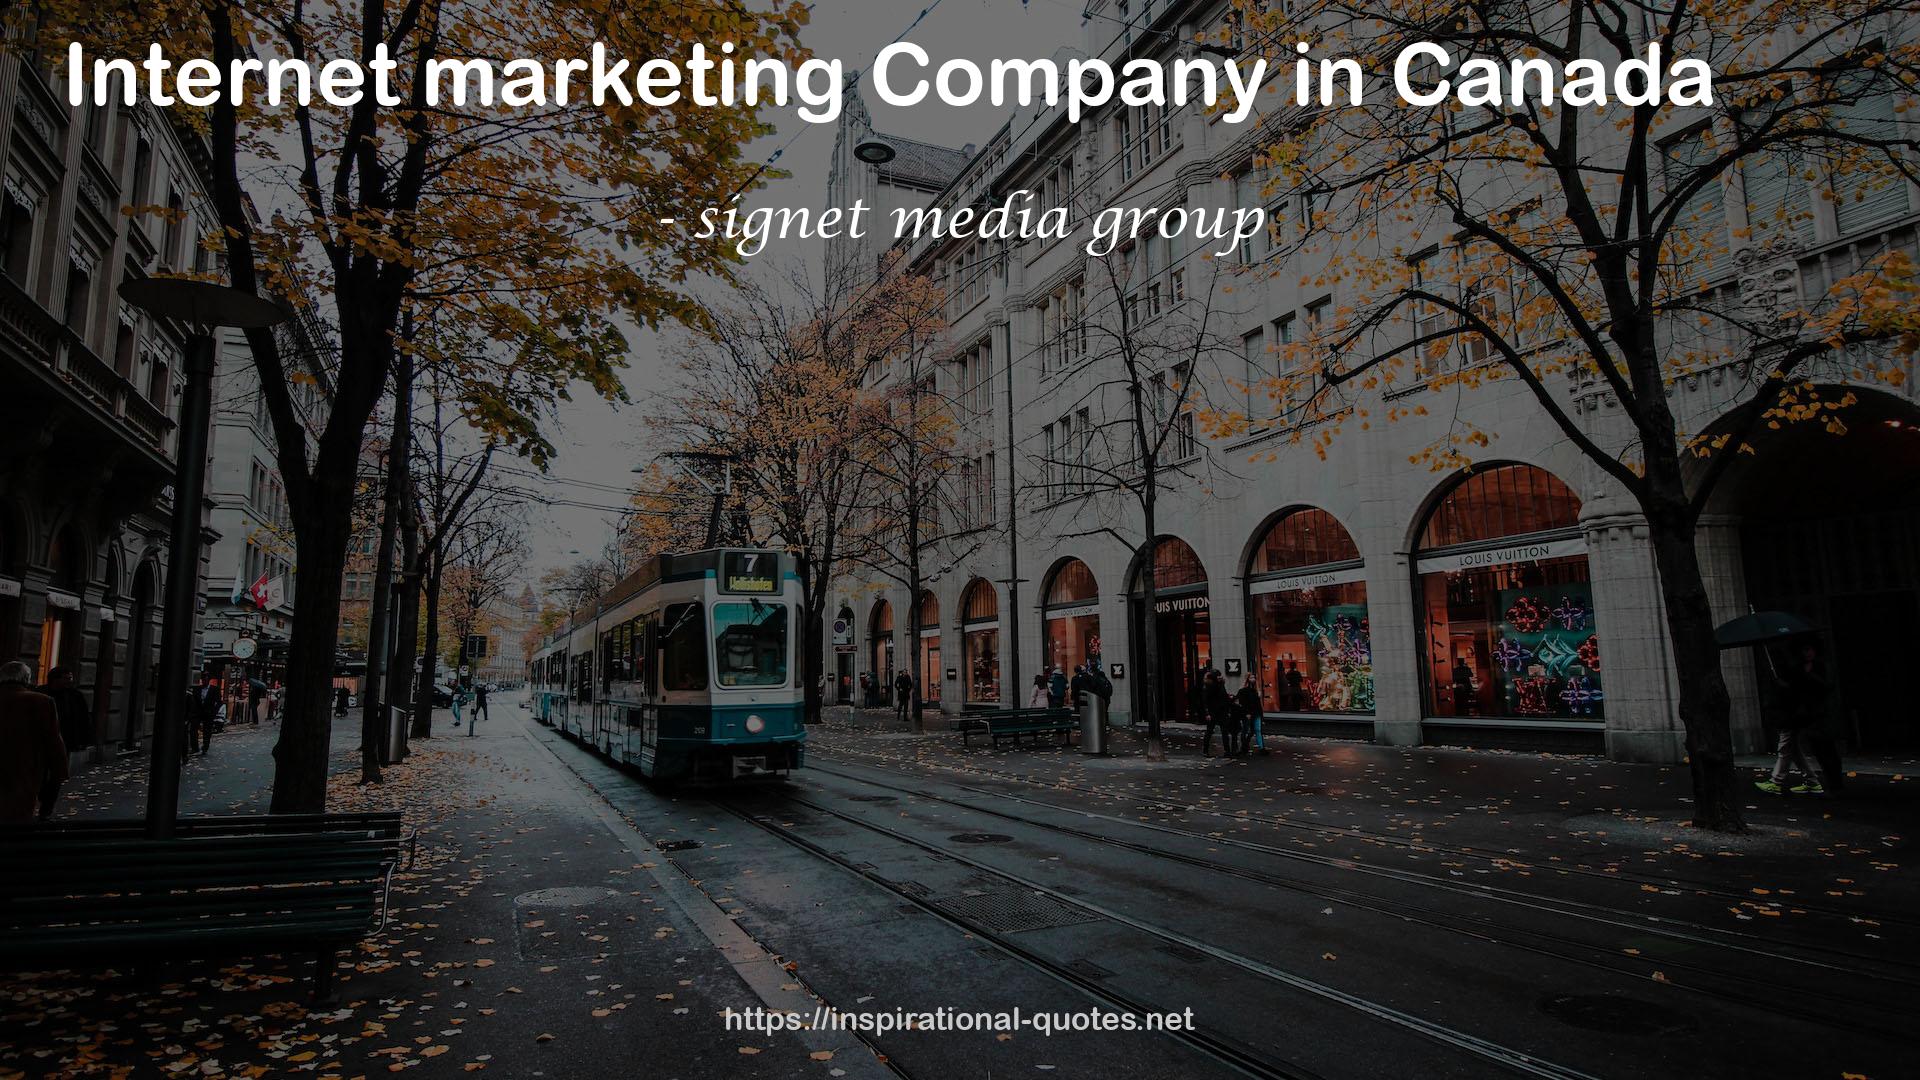 signet media group QUOTES